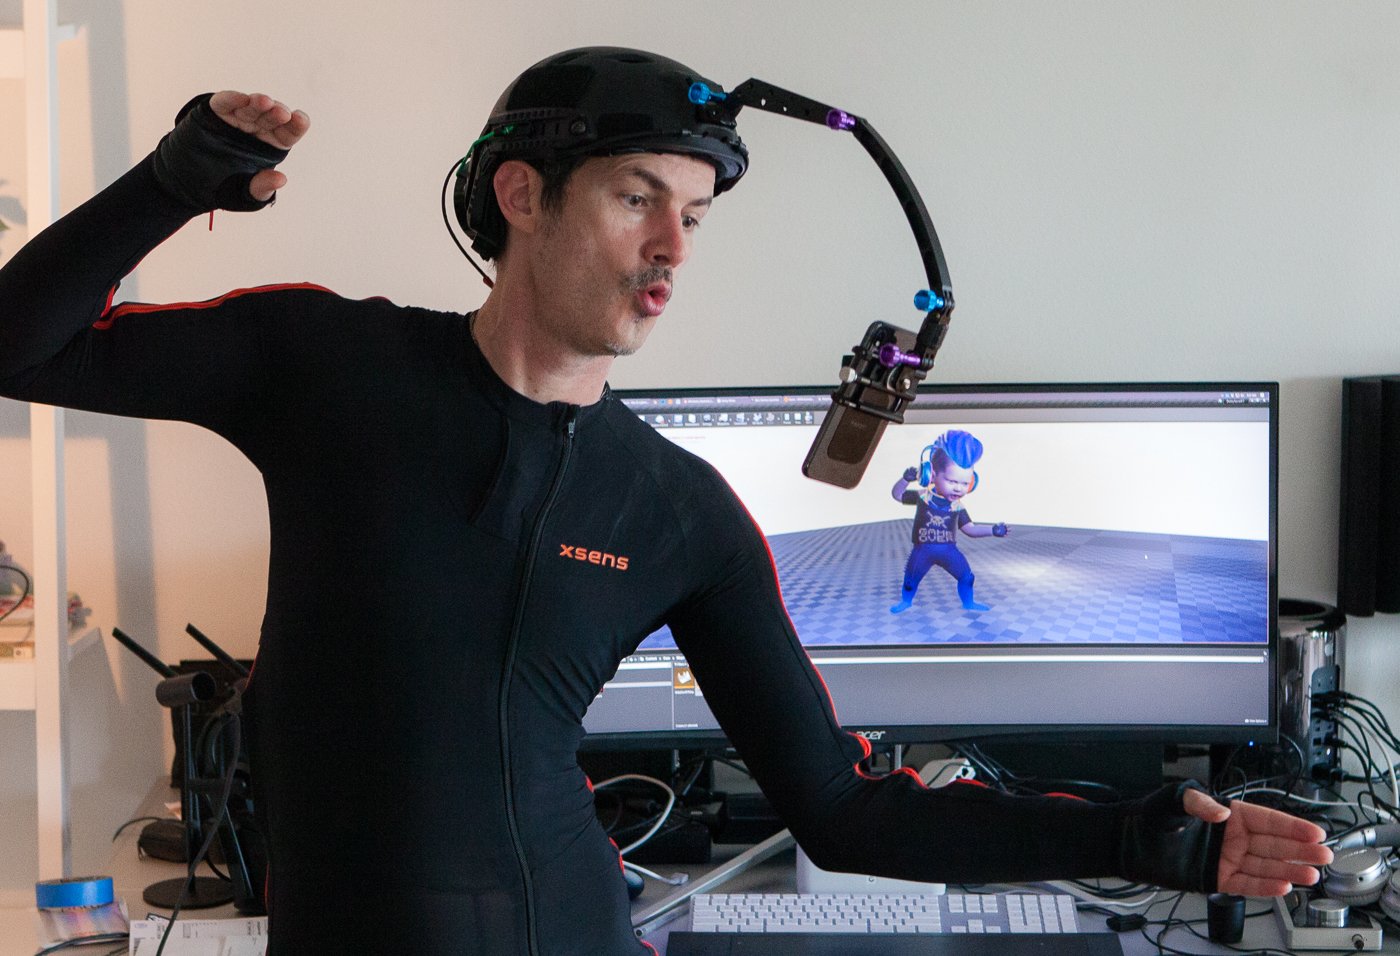 Democratising mocap: real-time full-performance with an iPhone X, Xsens,  IKINEMA, and Unreal Engine